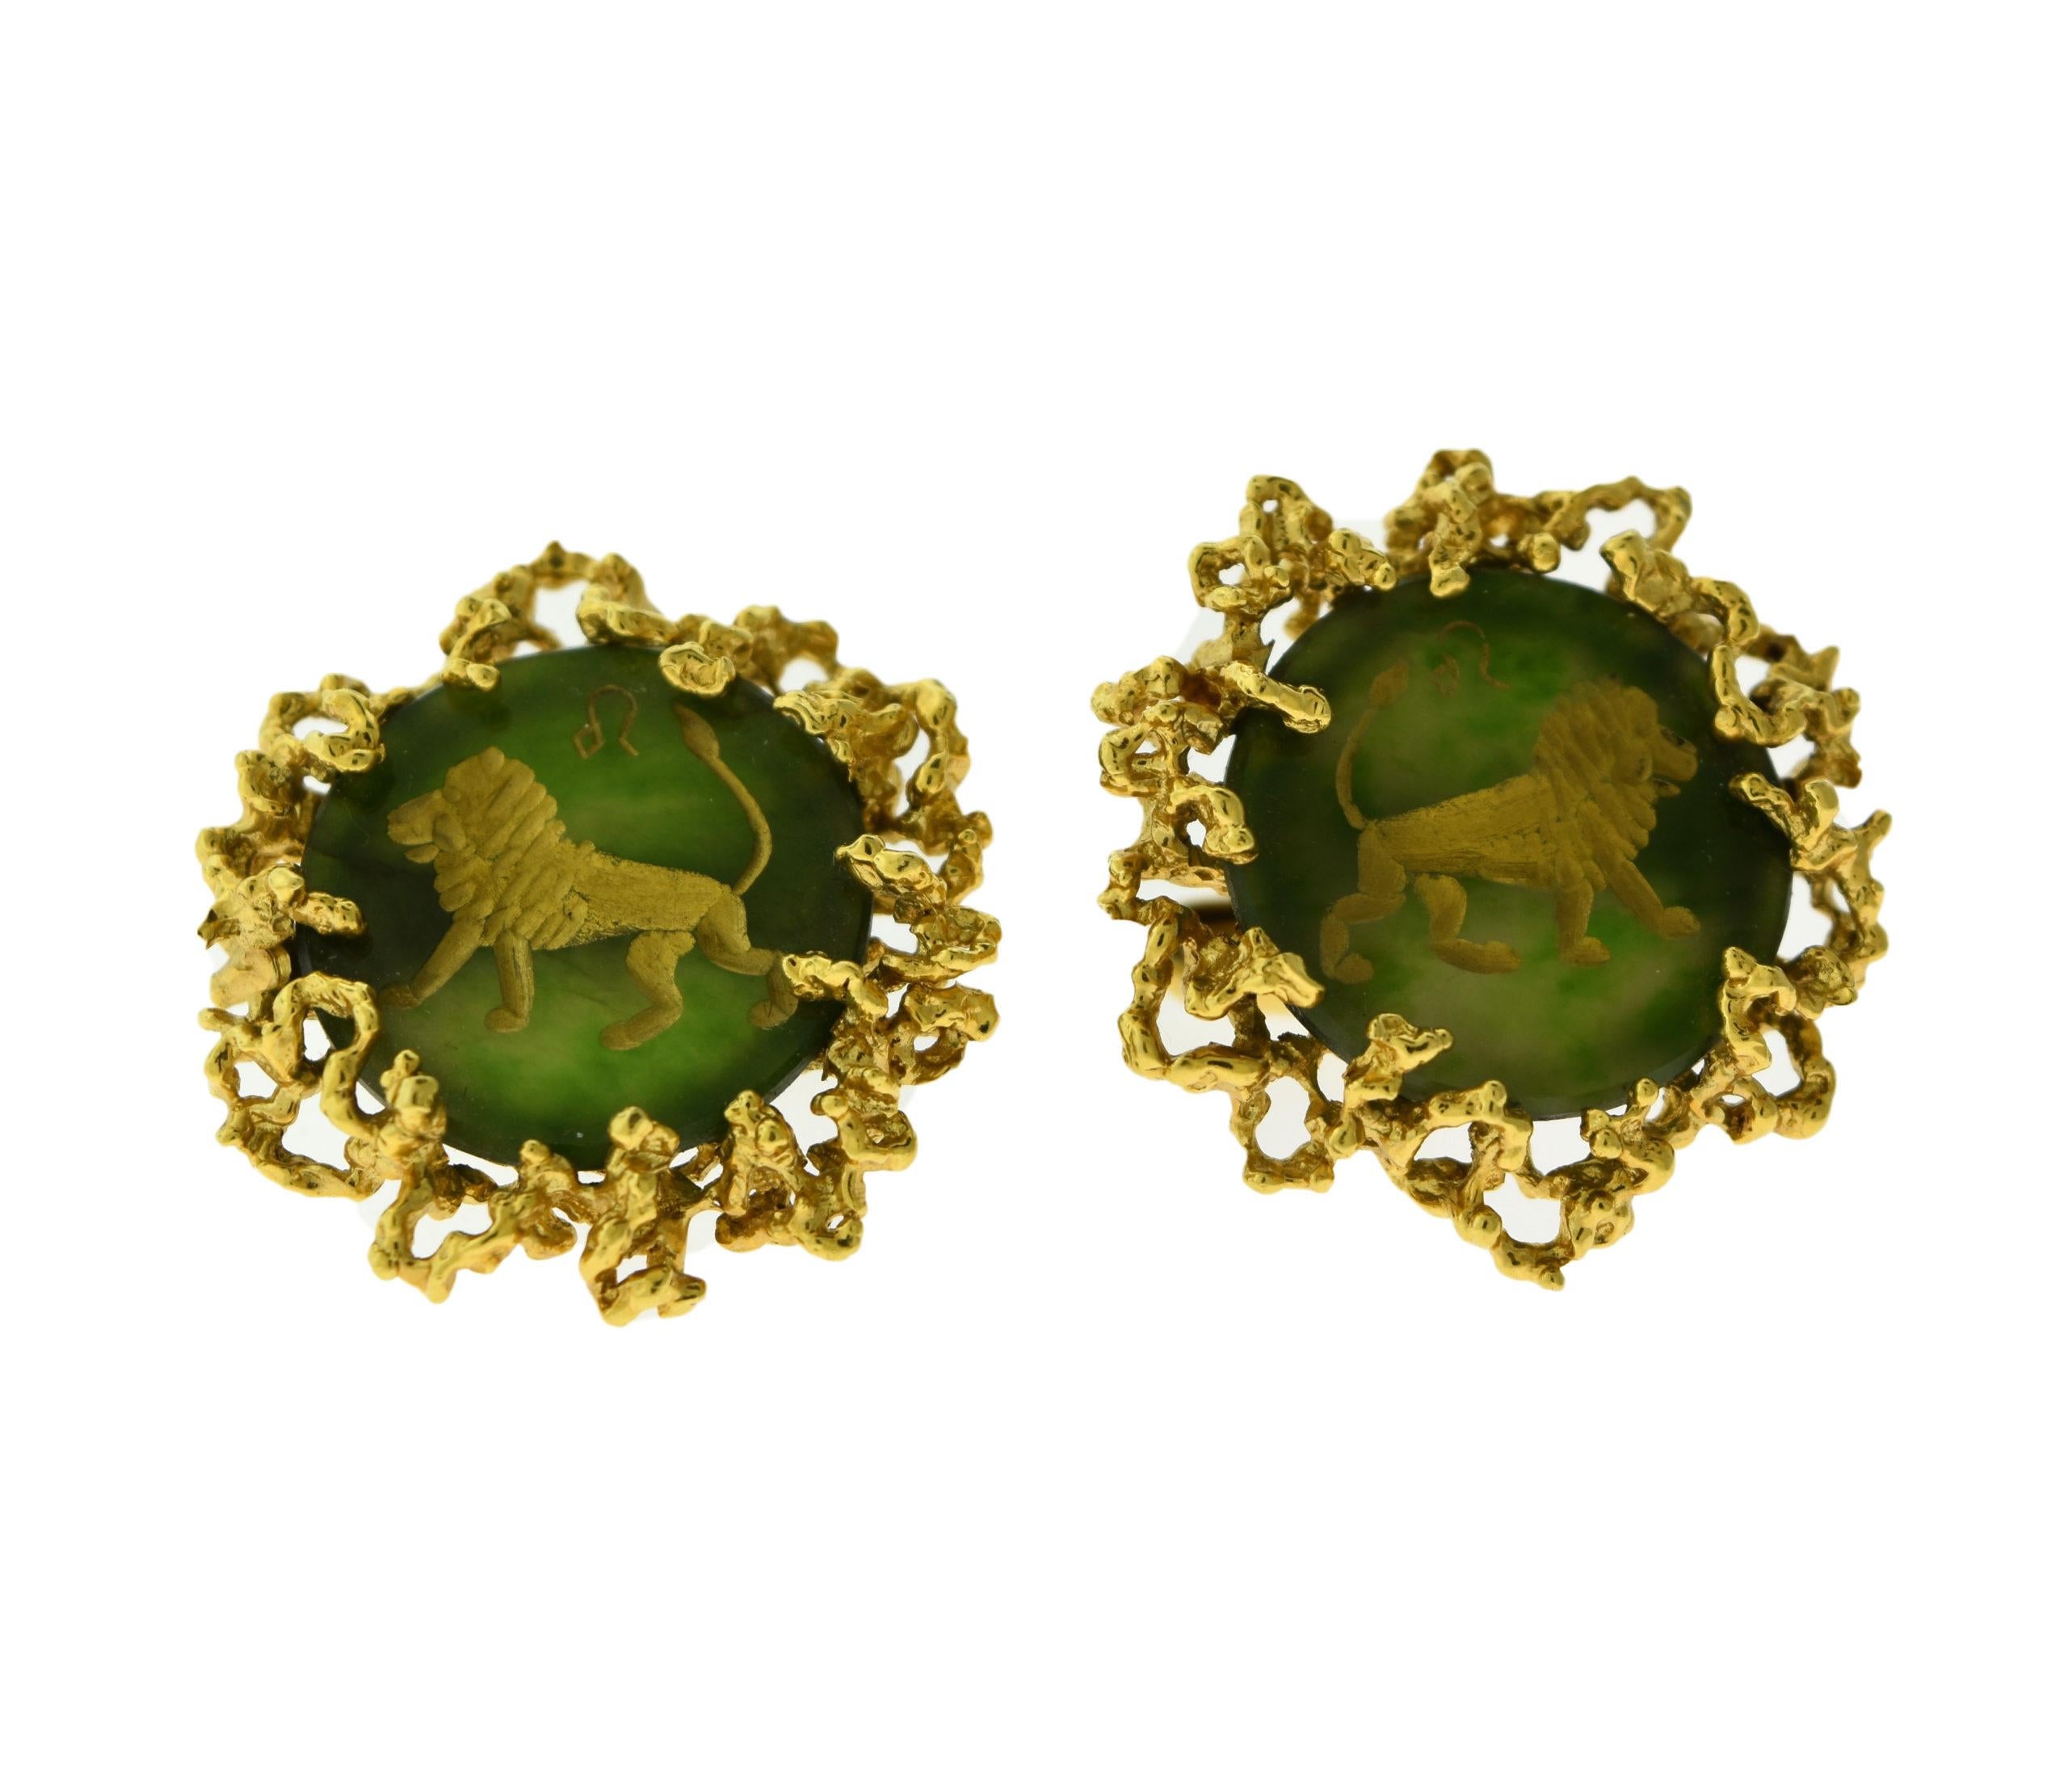 Cufflinks in 18 Karat Yellow Gold and Chrysoprase In Good Condition For Sale In Miami, FL